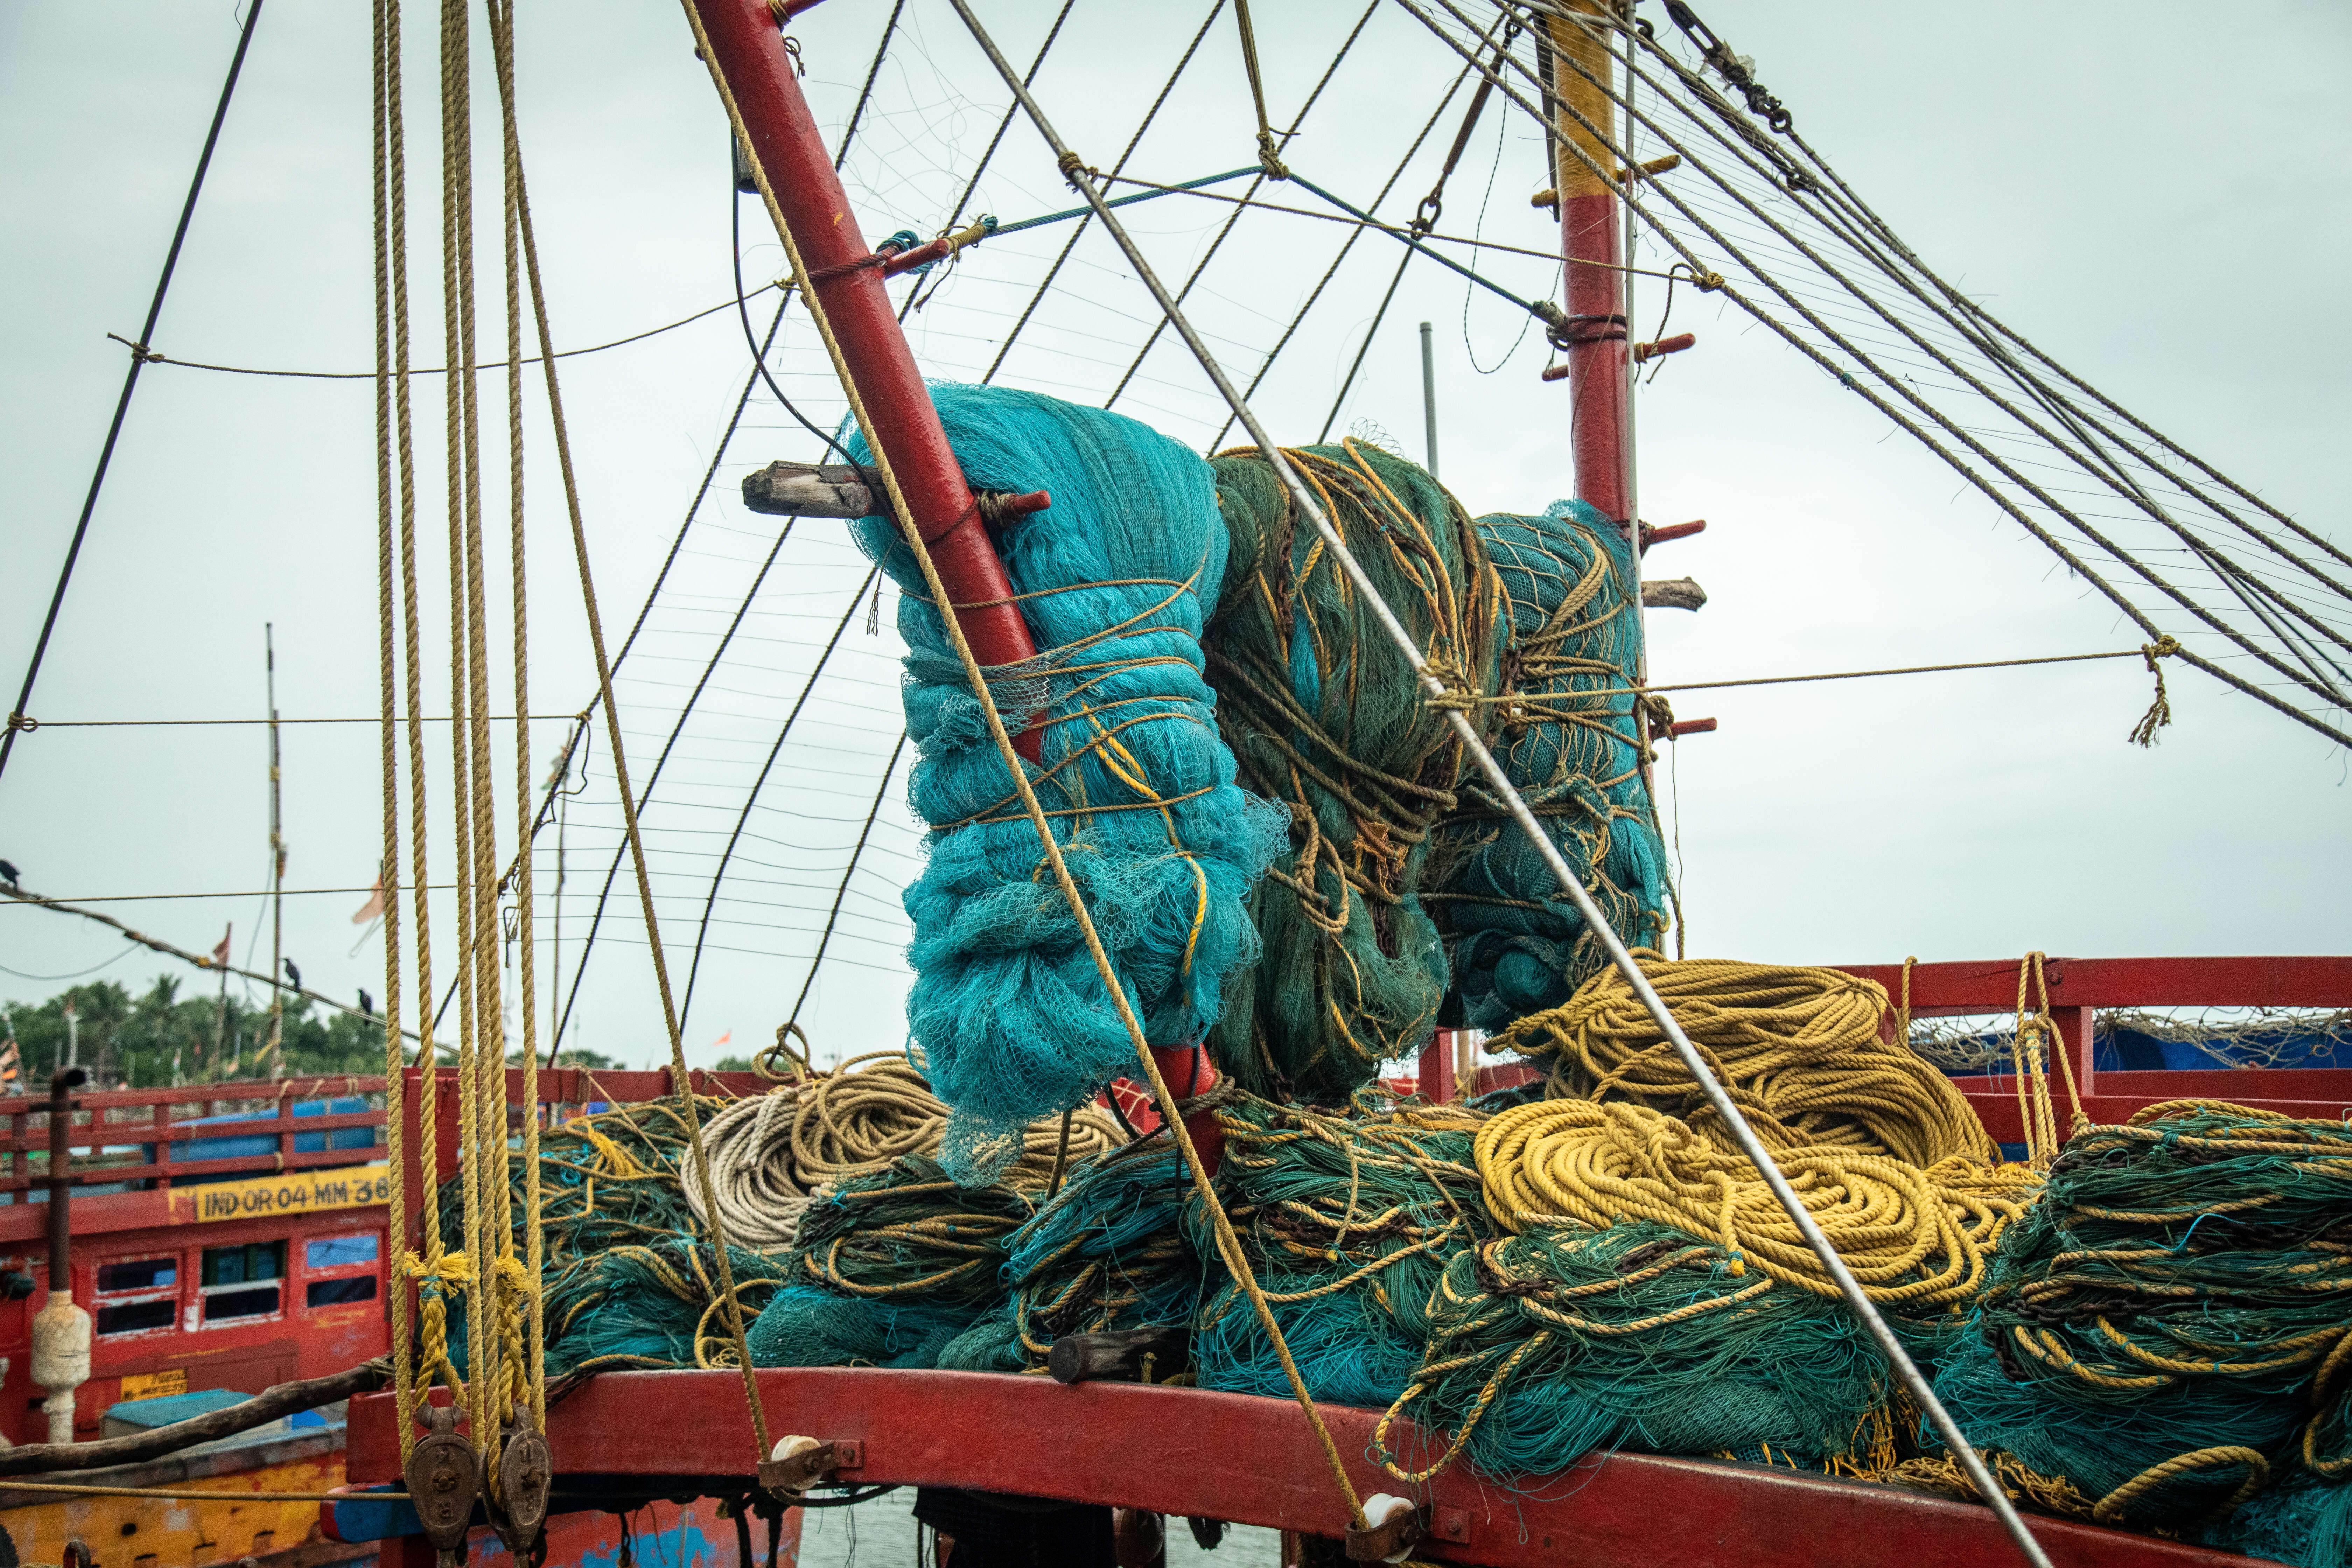 For coastal communities, climate, and our ocean: Bottom trawling must end now